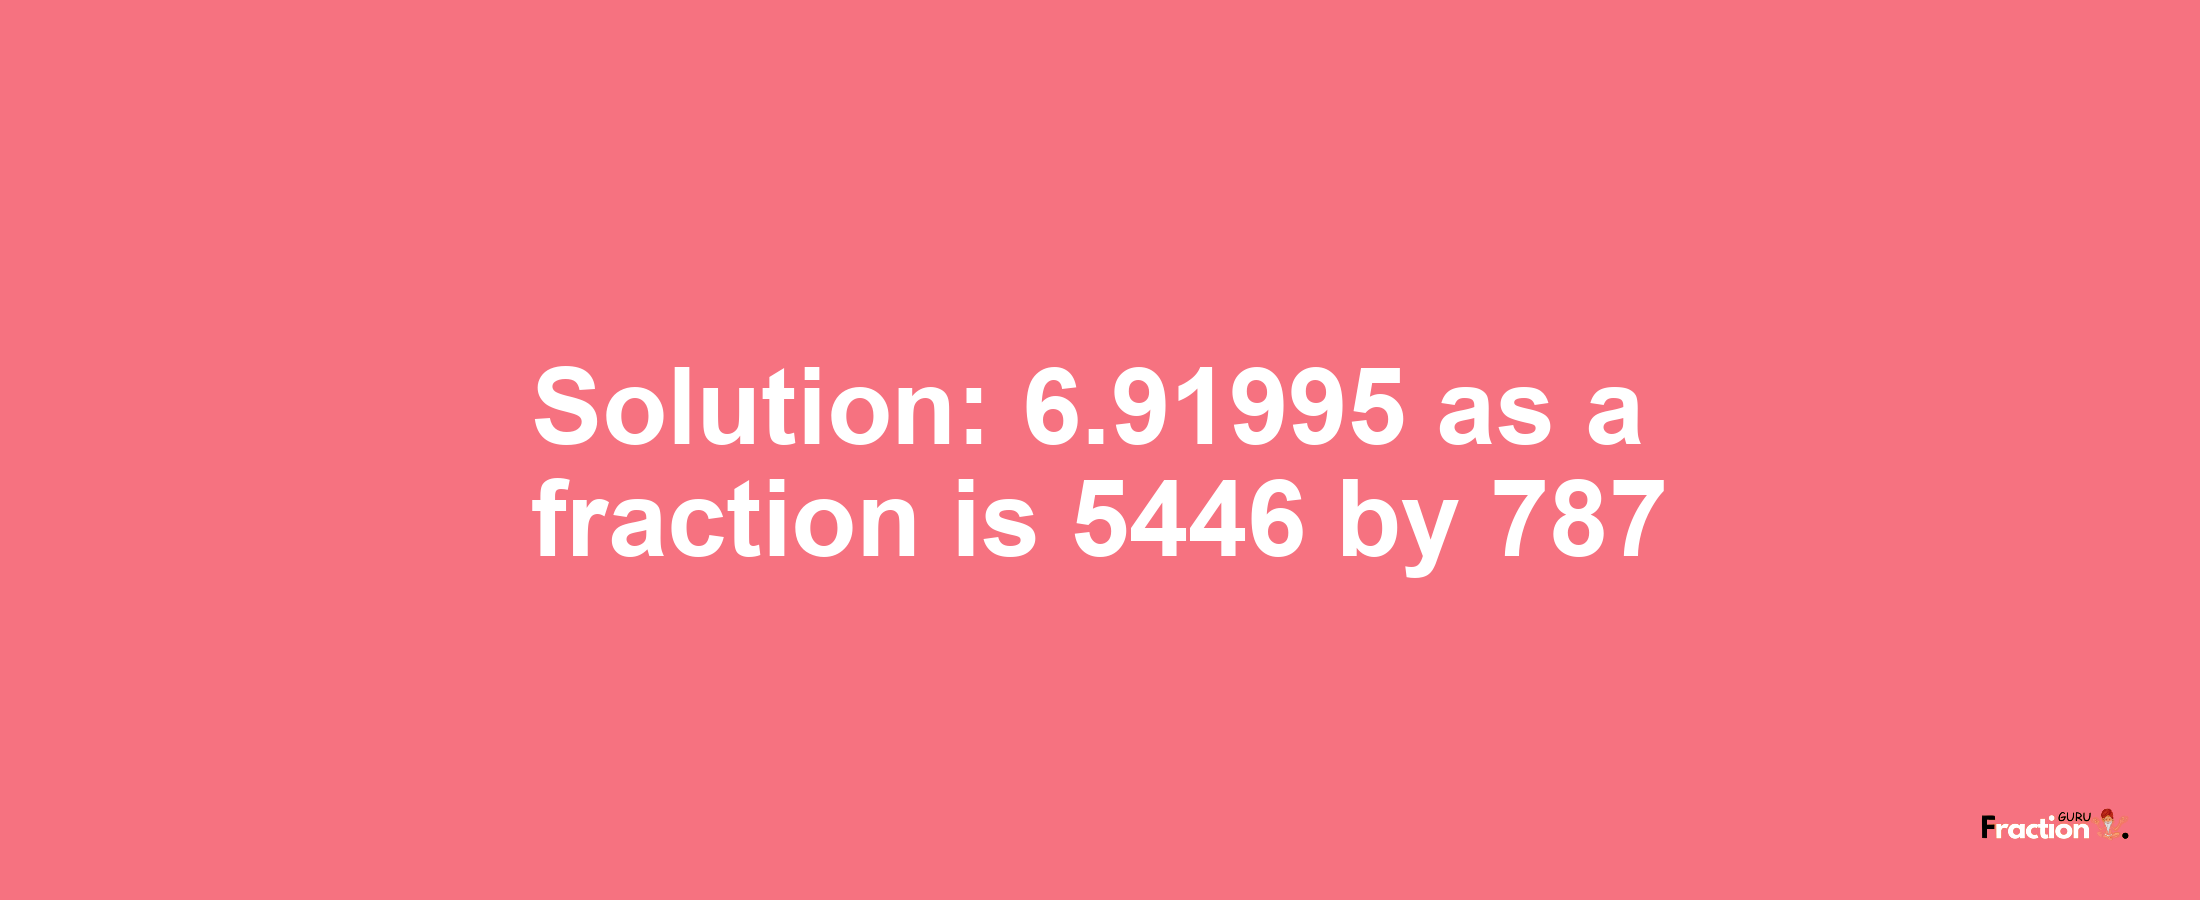 Solution:6.91995 as a fraction is 5446/787